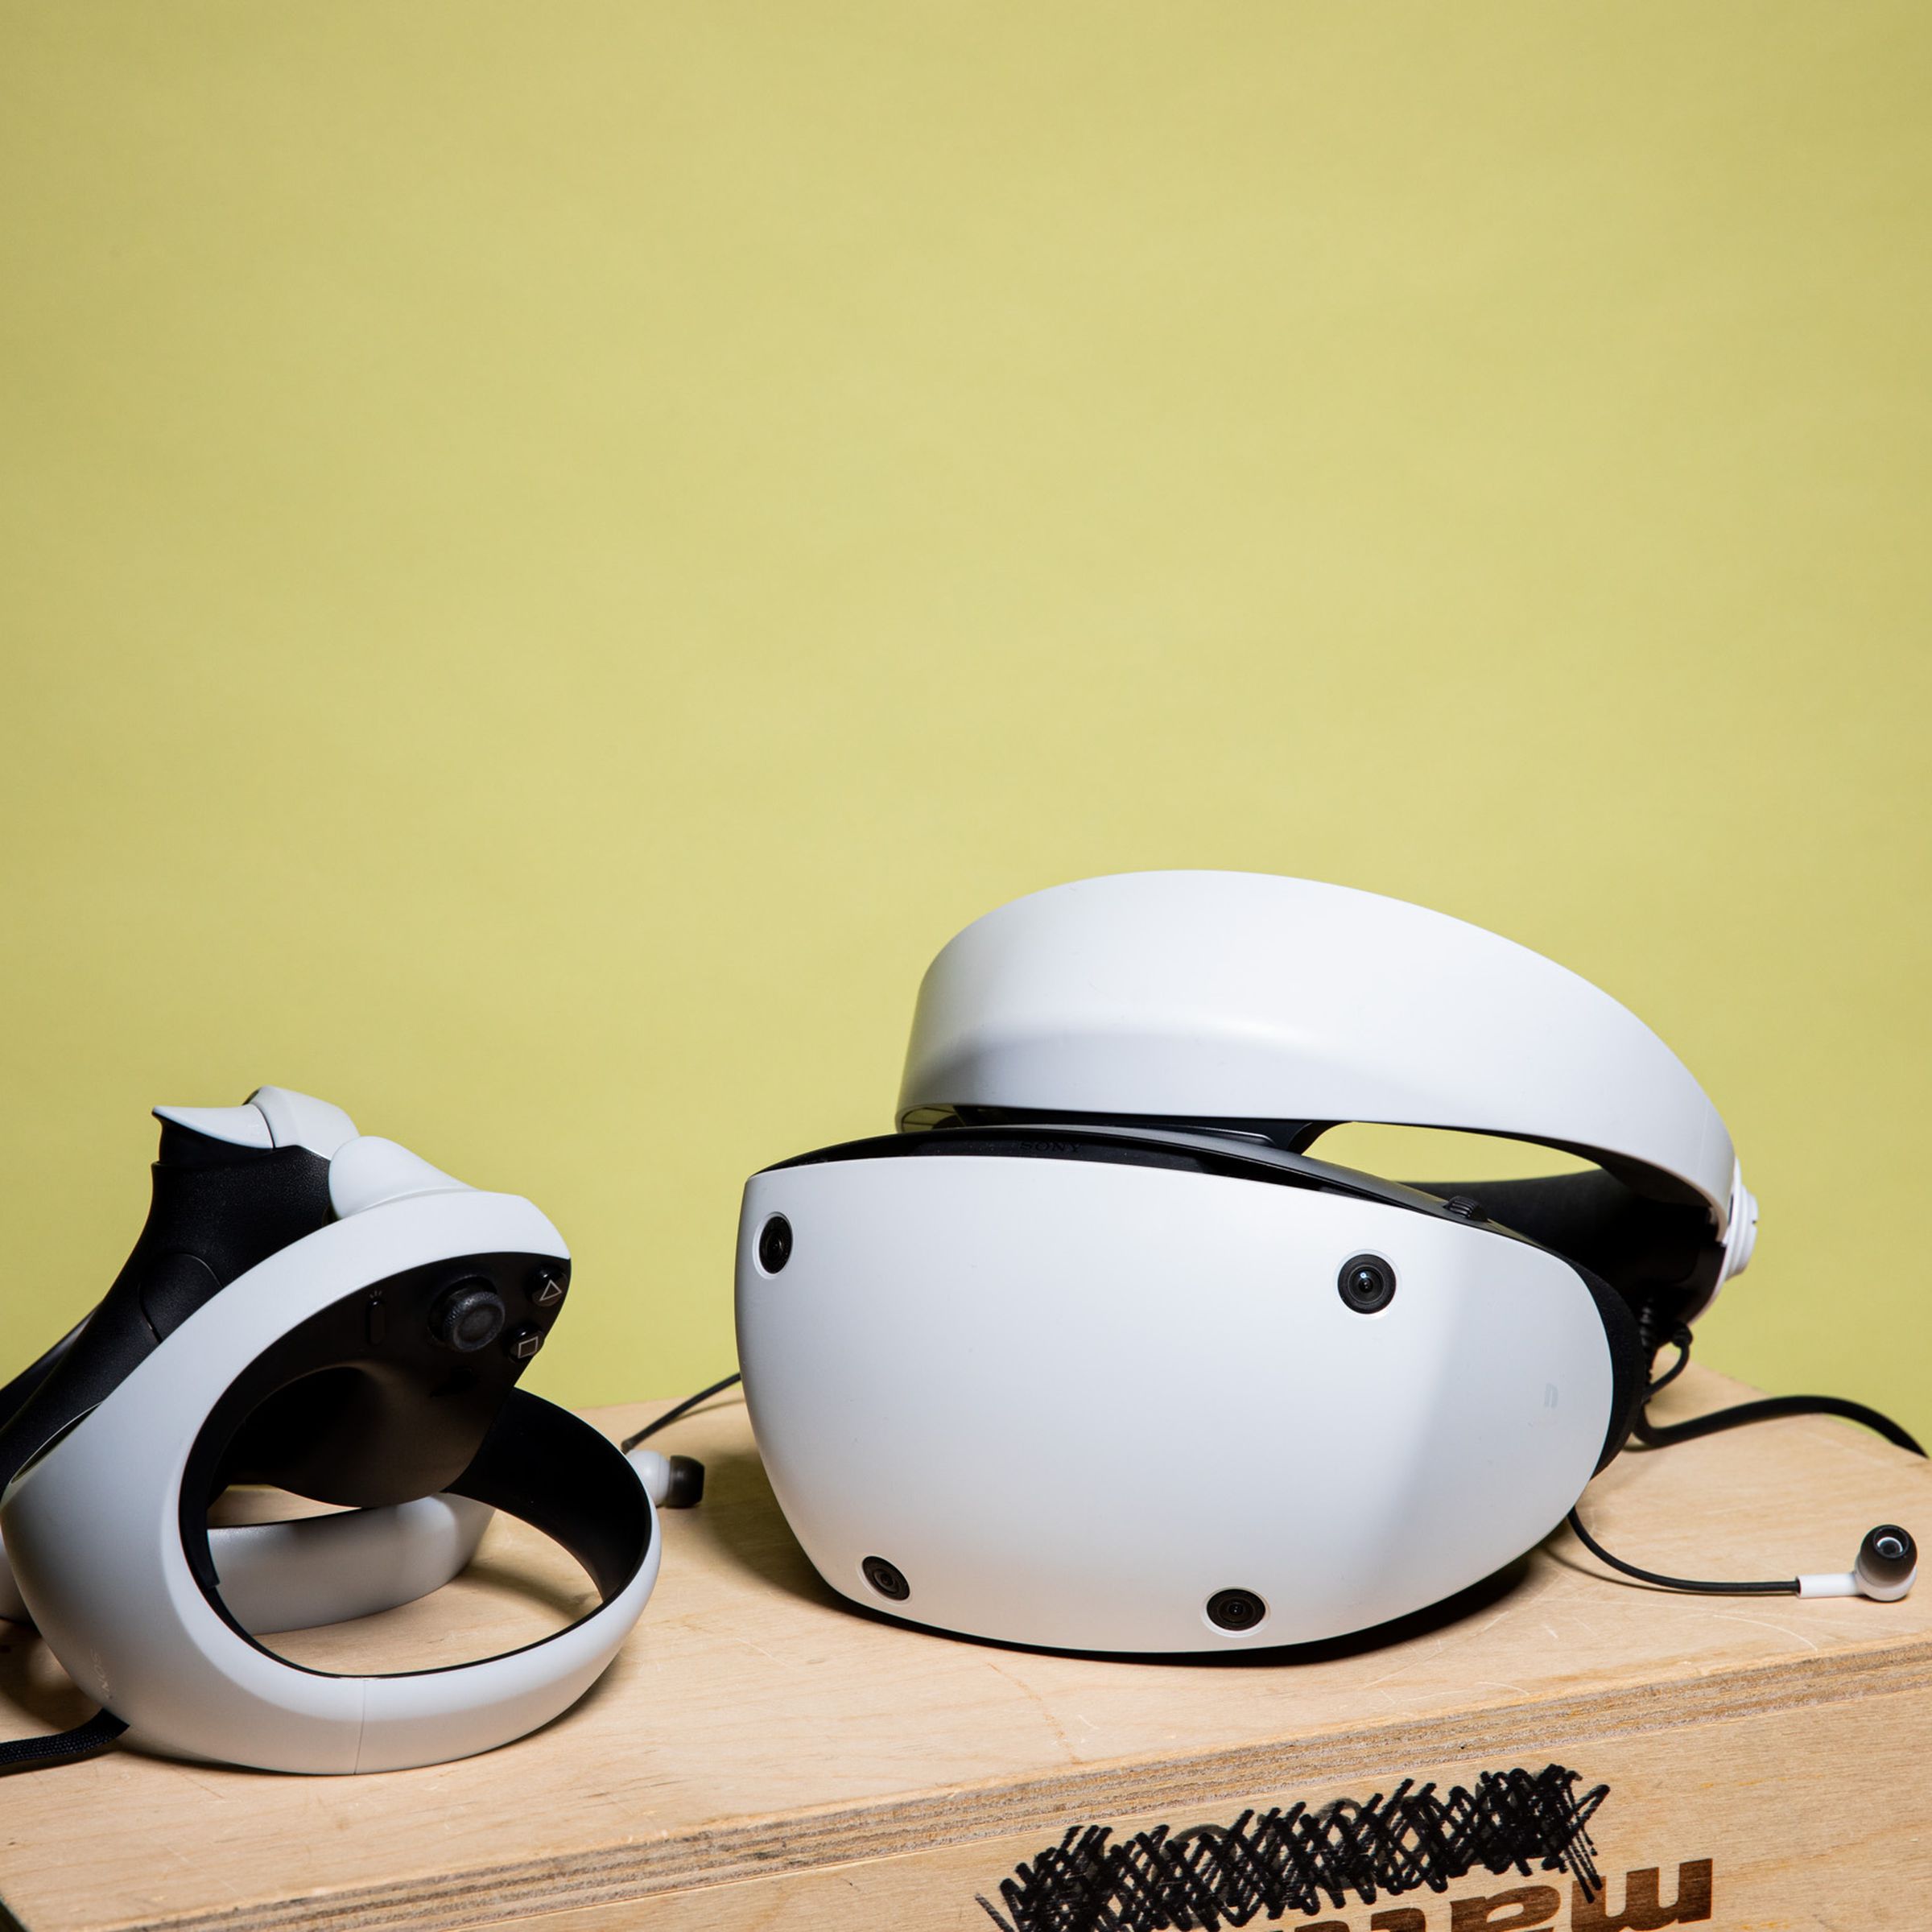 The headset and controllers sit on a wooden box, earbuds dangling out.